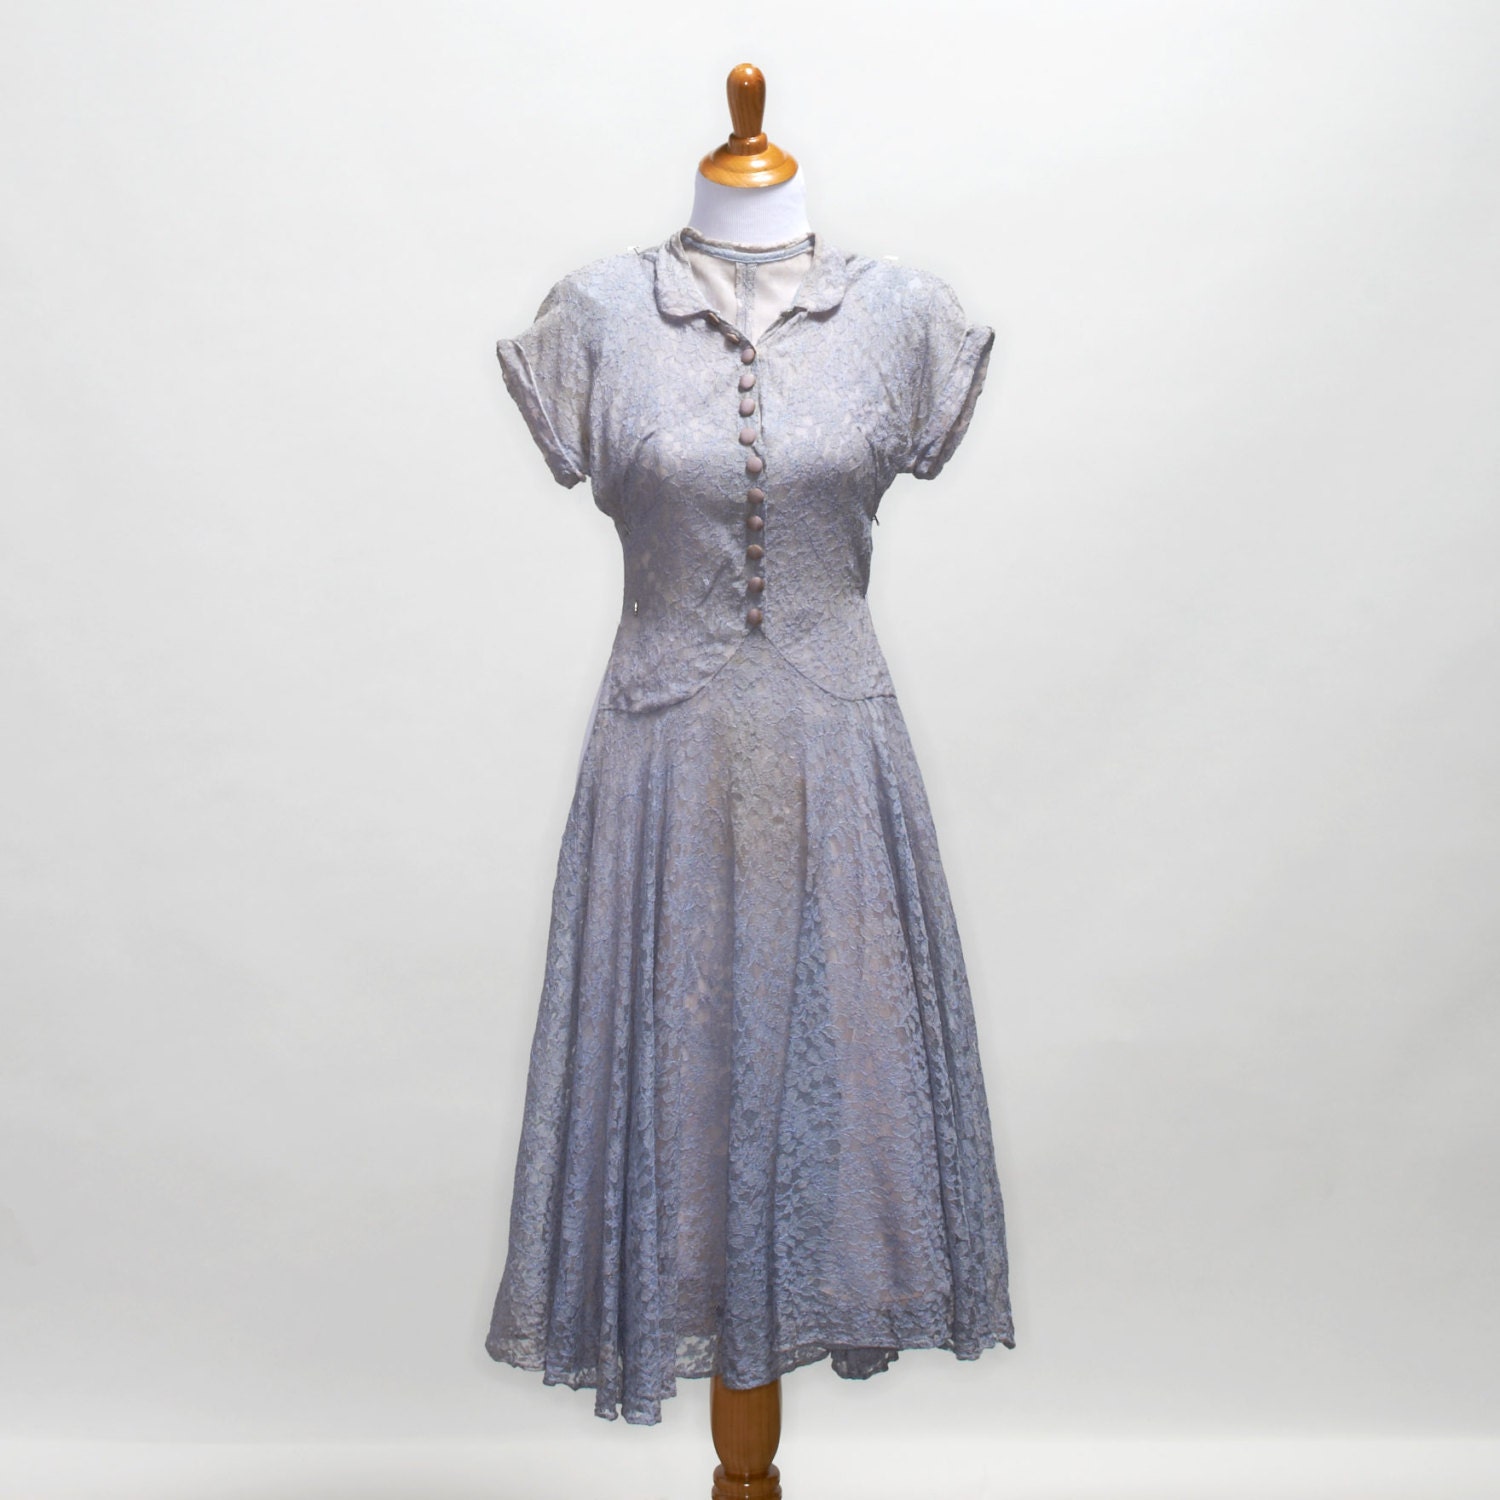 1940's Pale Faded Lavender Lace Pin Up Dress with Covered